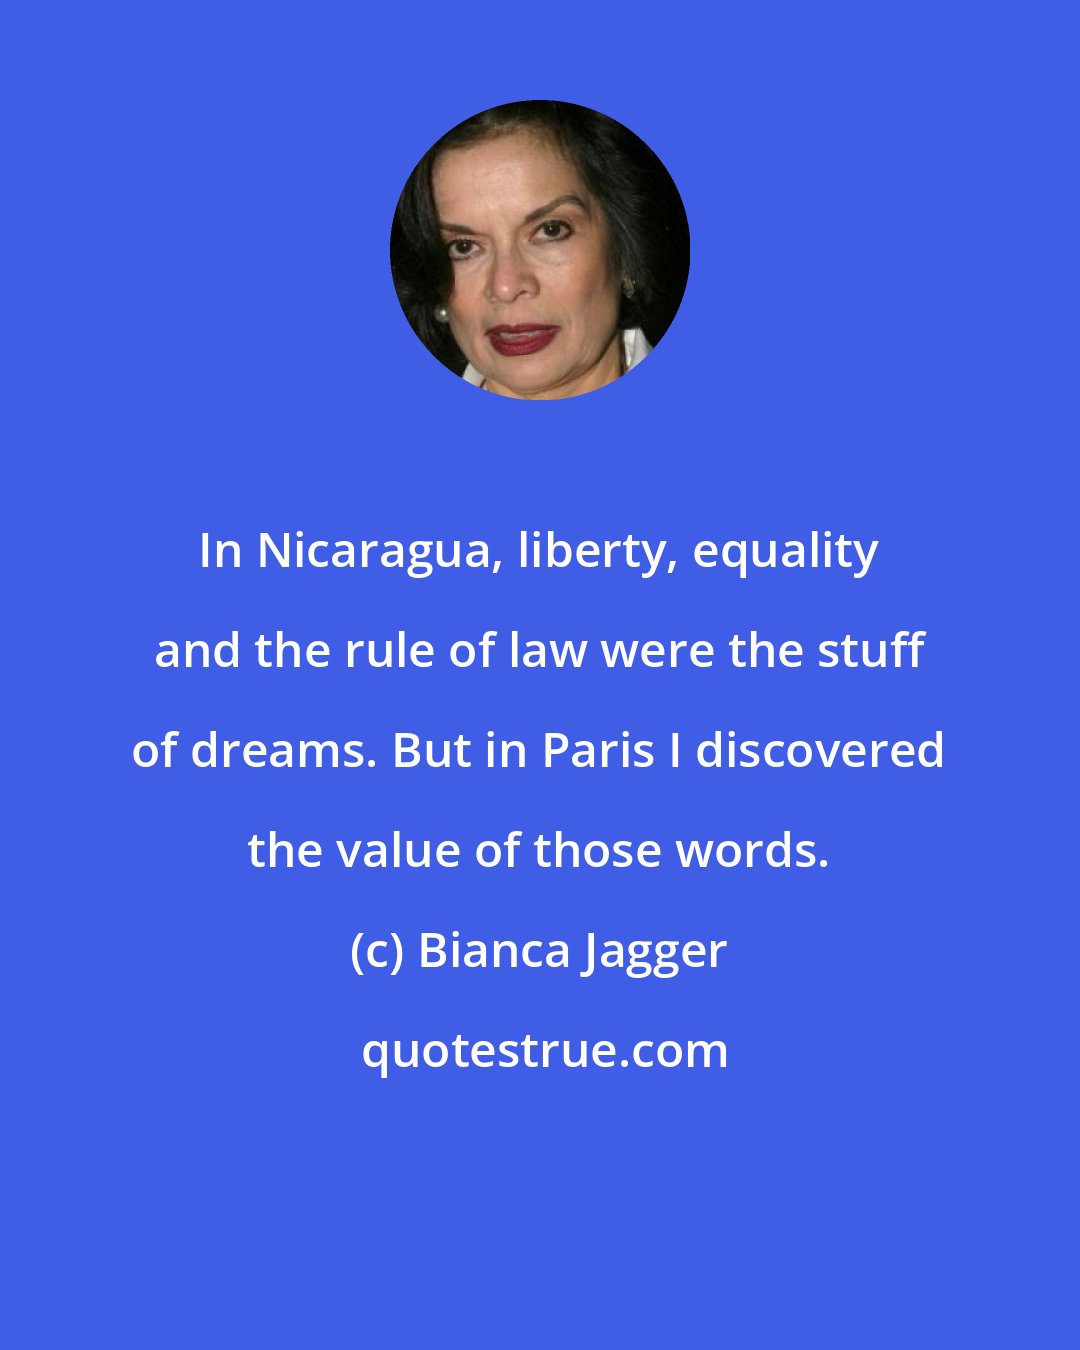 Bianca Jagger: In Nicaragua, liberty, equality and the rule of law were the stuff of dreams. But in Paris I discovered the value of those words.